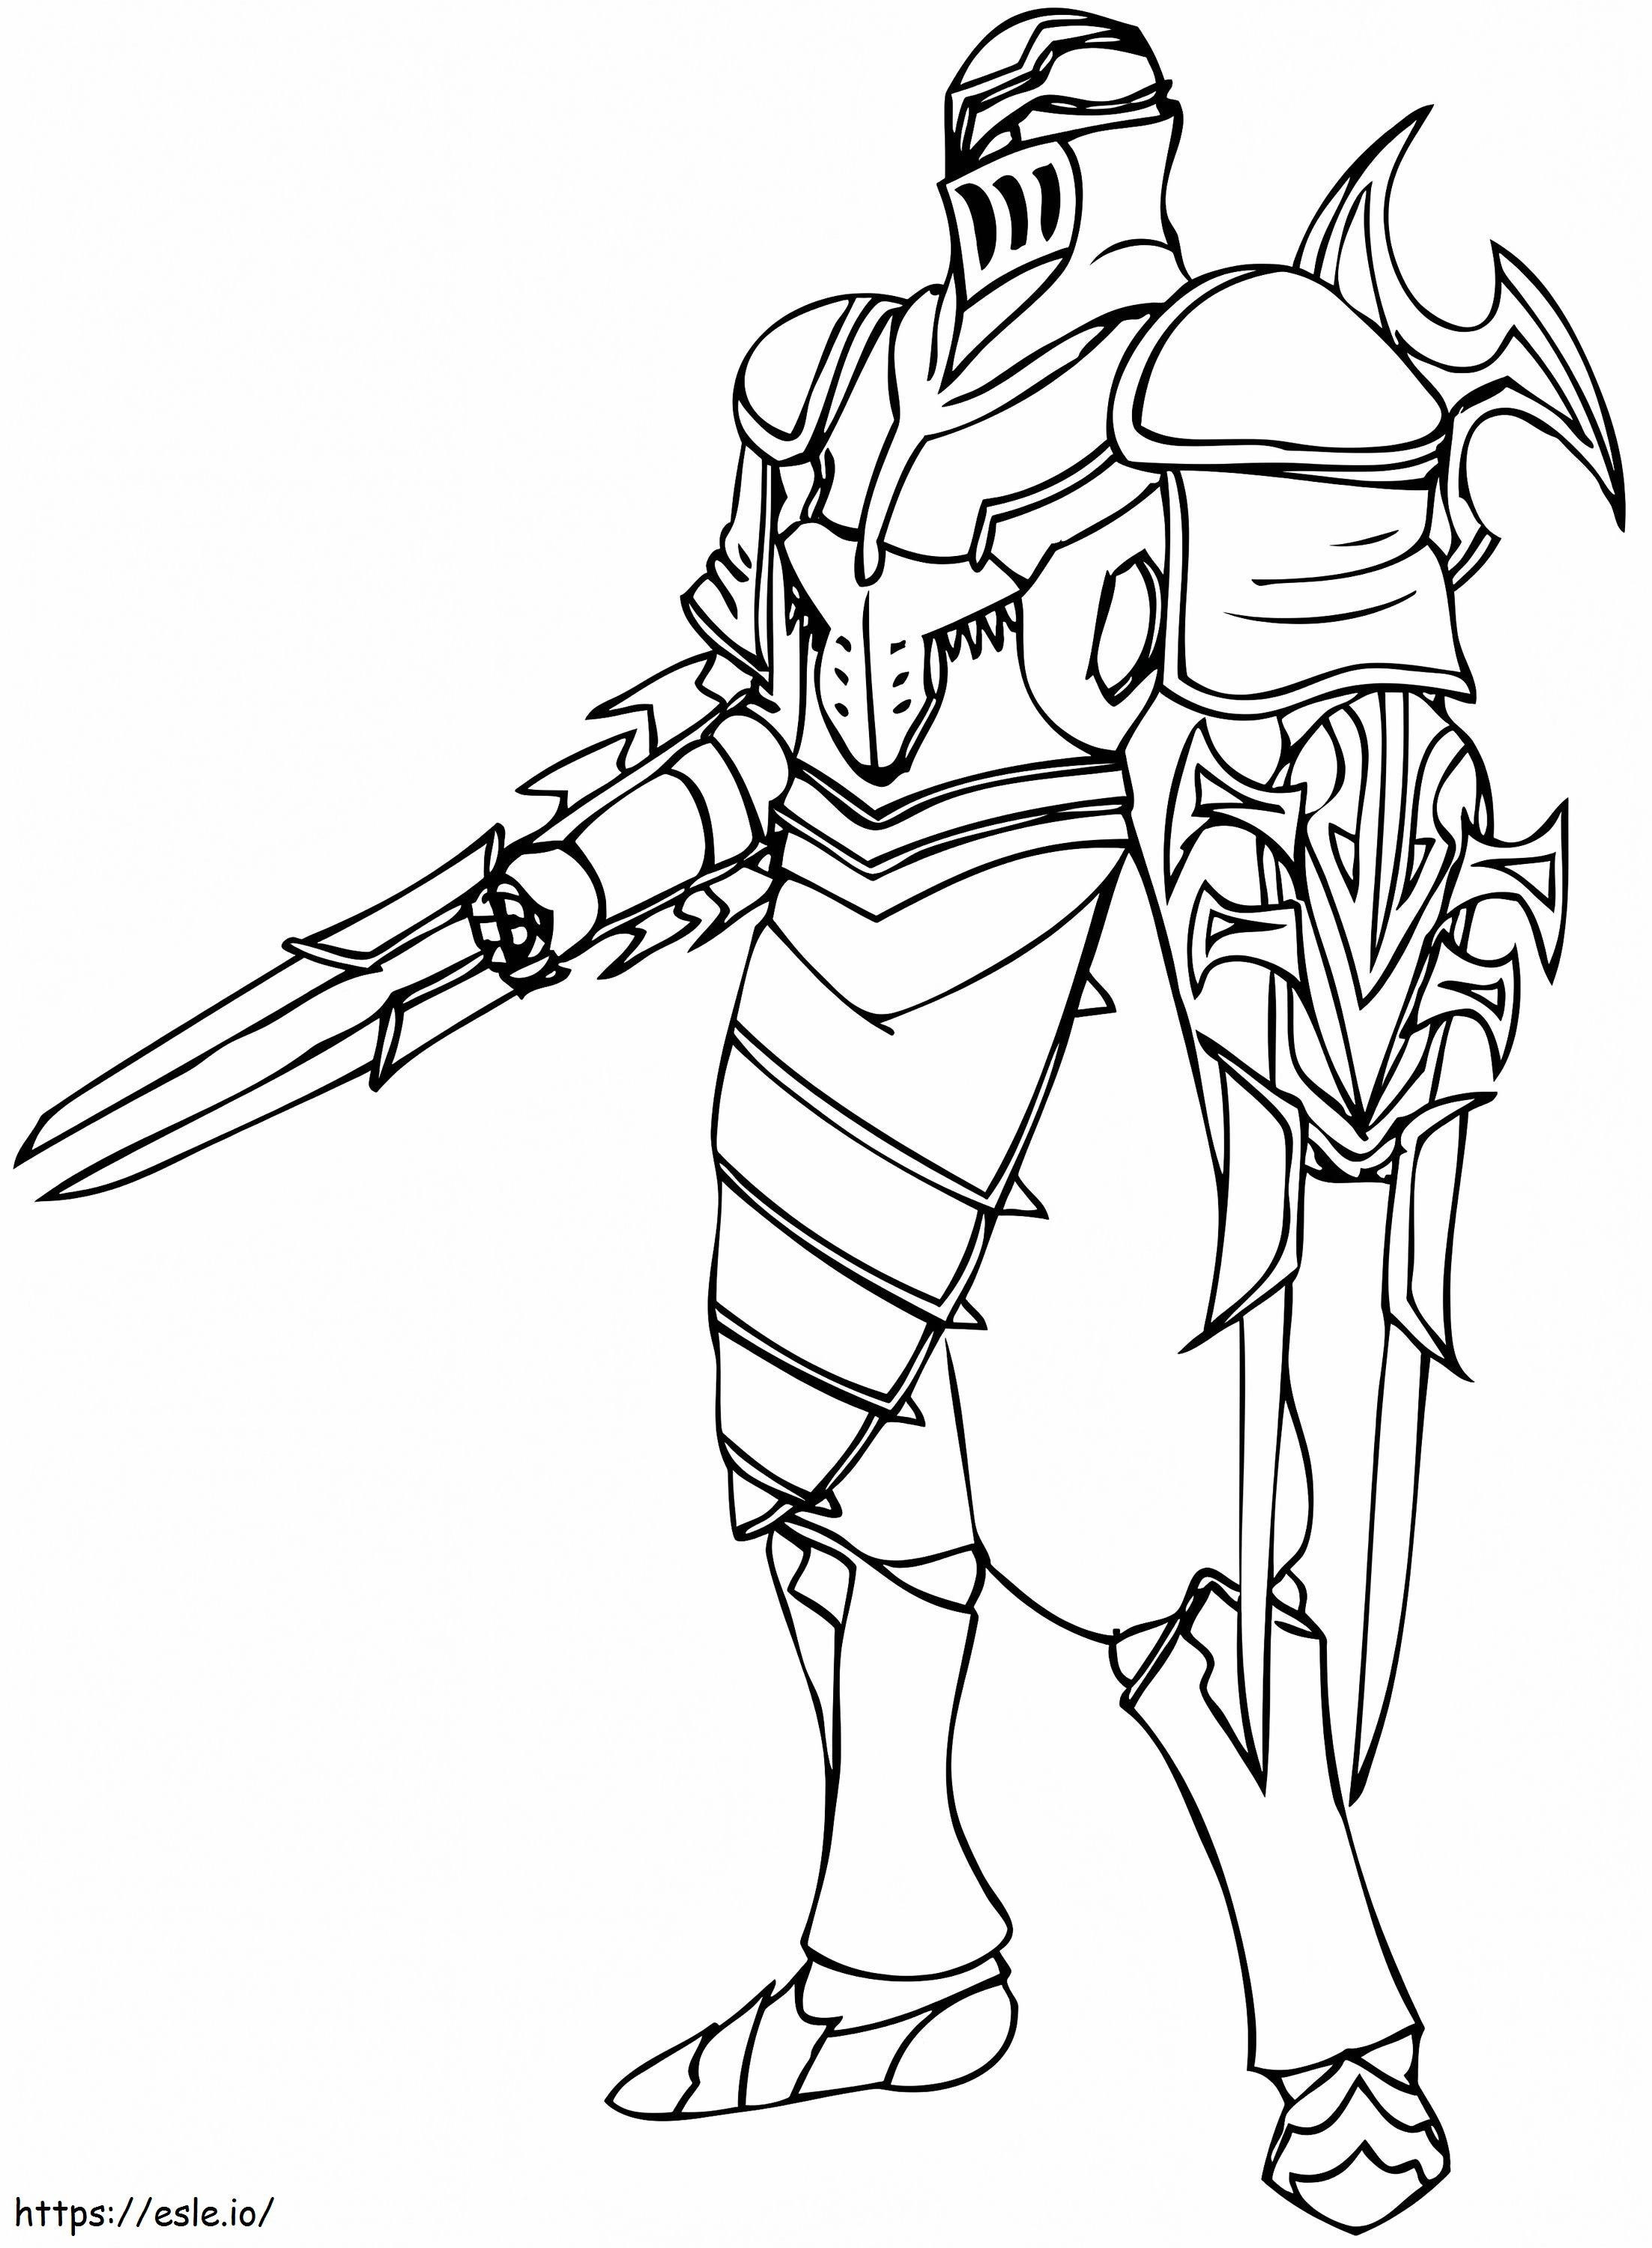 1561016645 Zed A4 coloring page